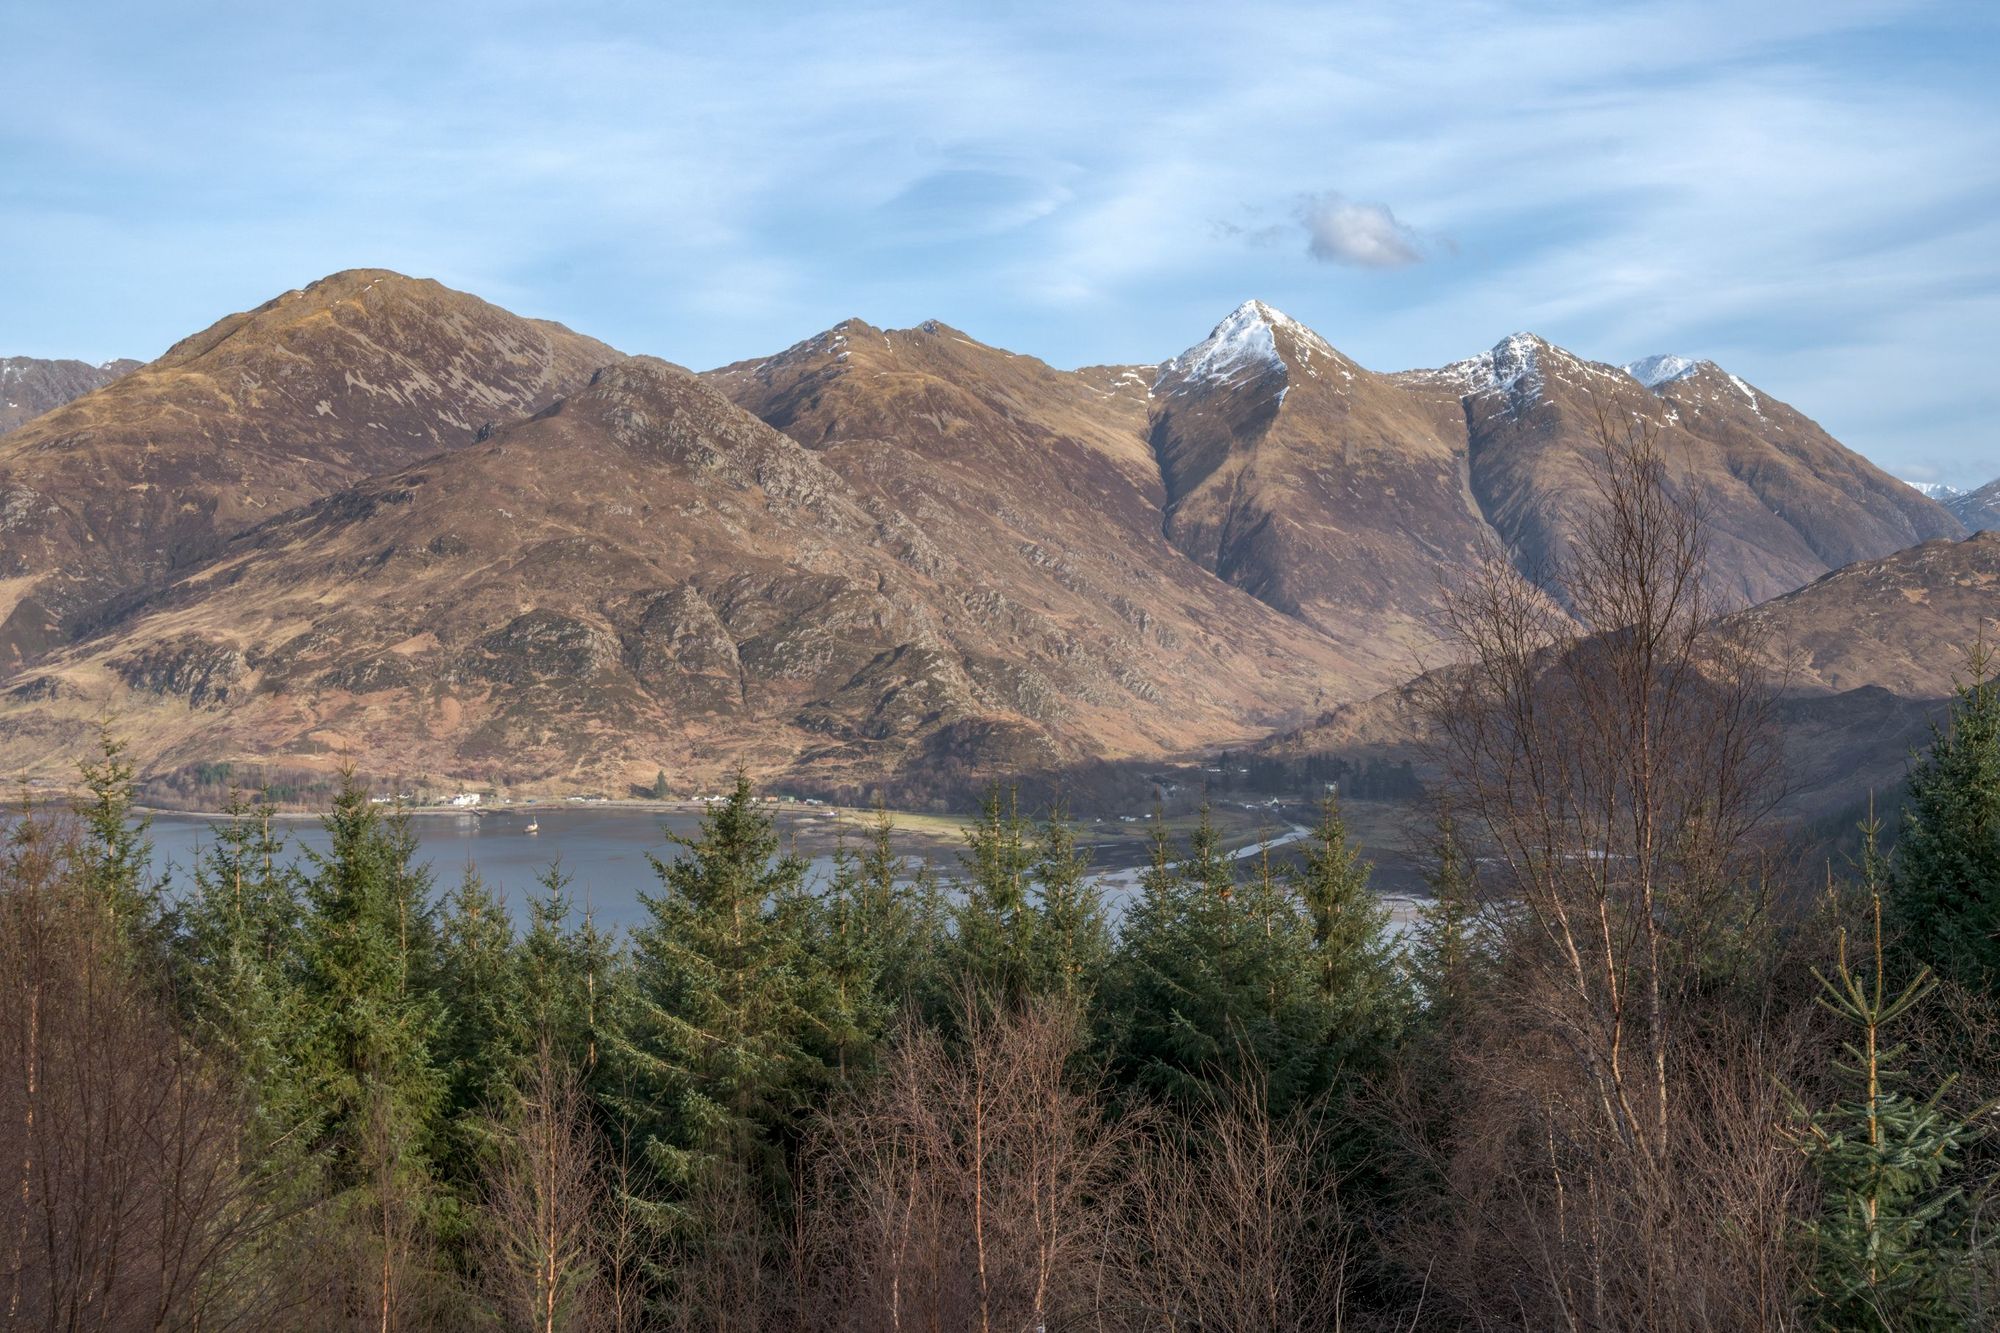 The Five Sisters of Kintail overlooking Loch Duich on the road to Isle of Skye. Photo: Getty